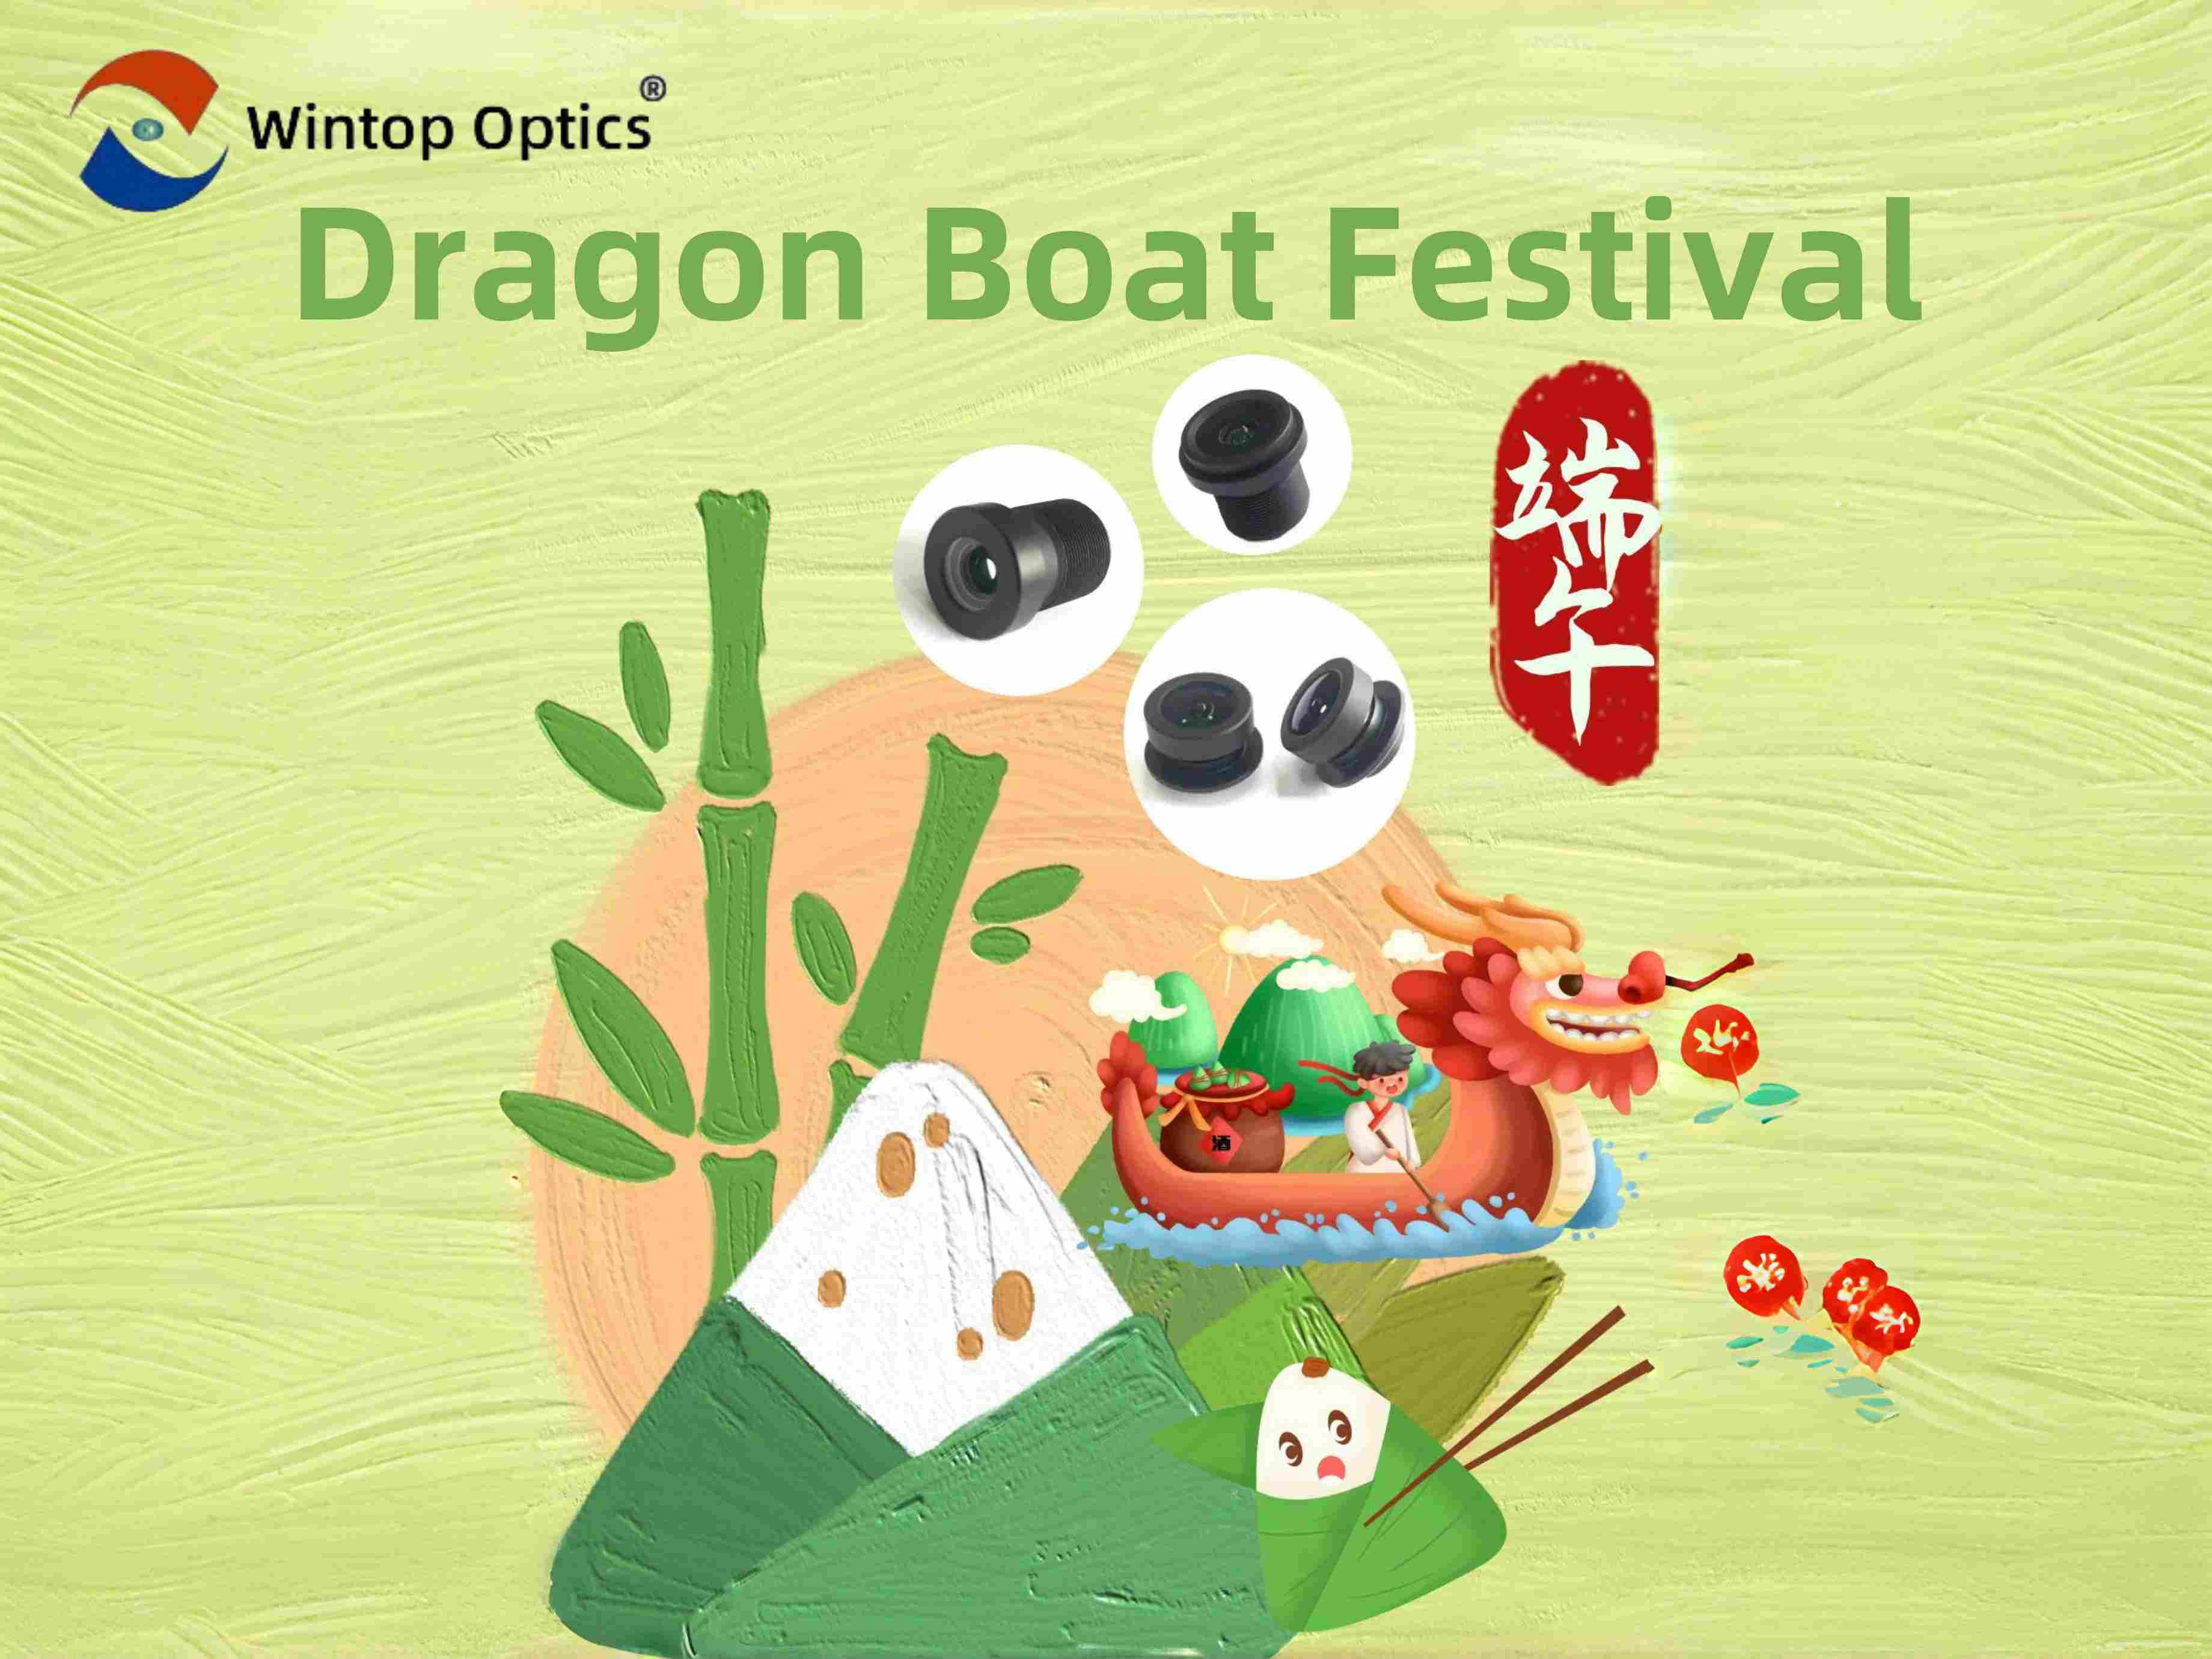 Innovation Meets Heritage: Wintop Optics's Tribute to the Dragon Boat Festival